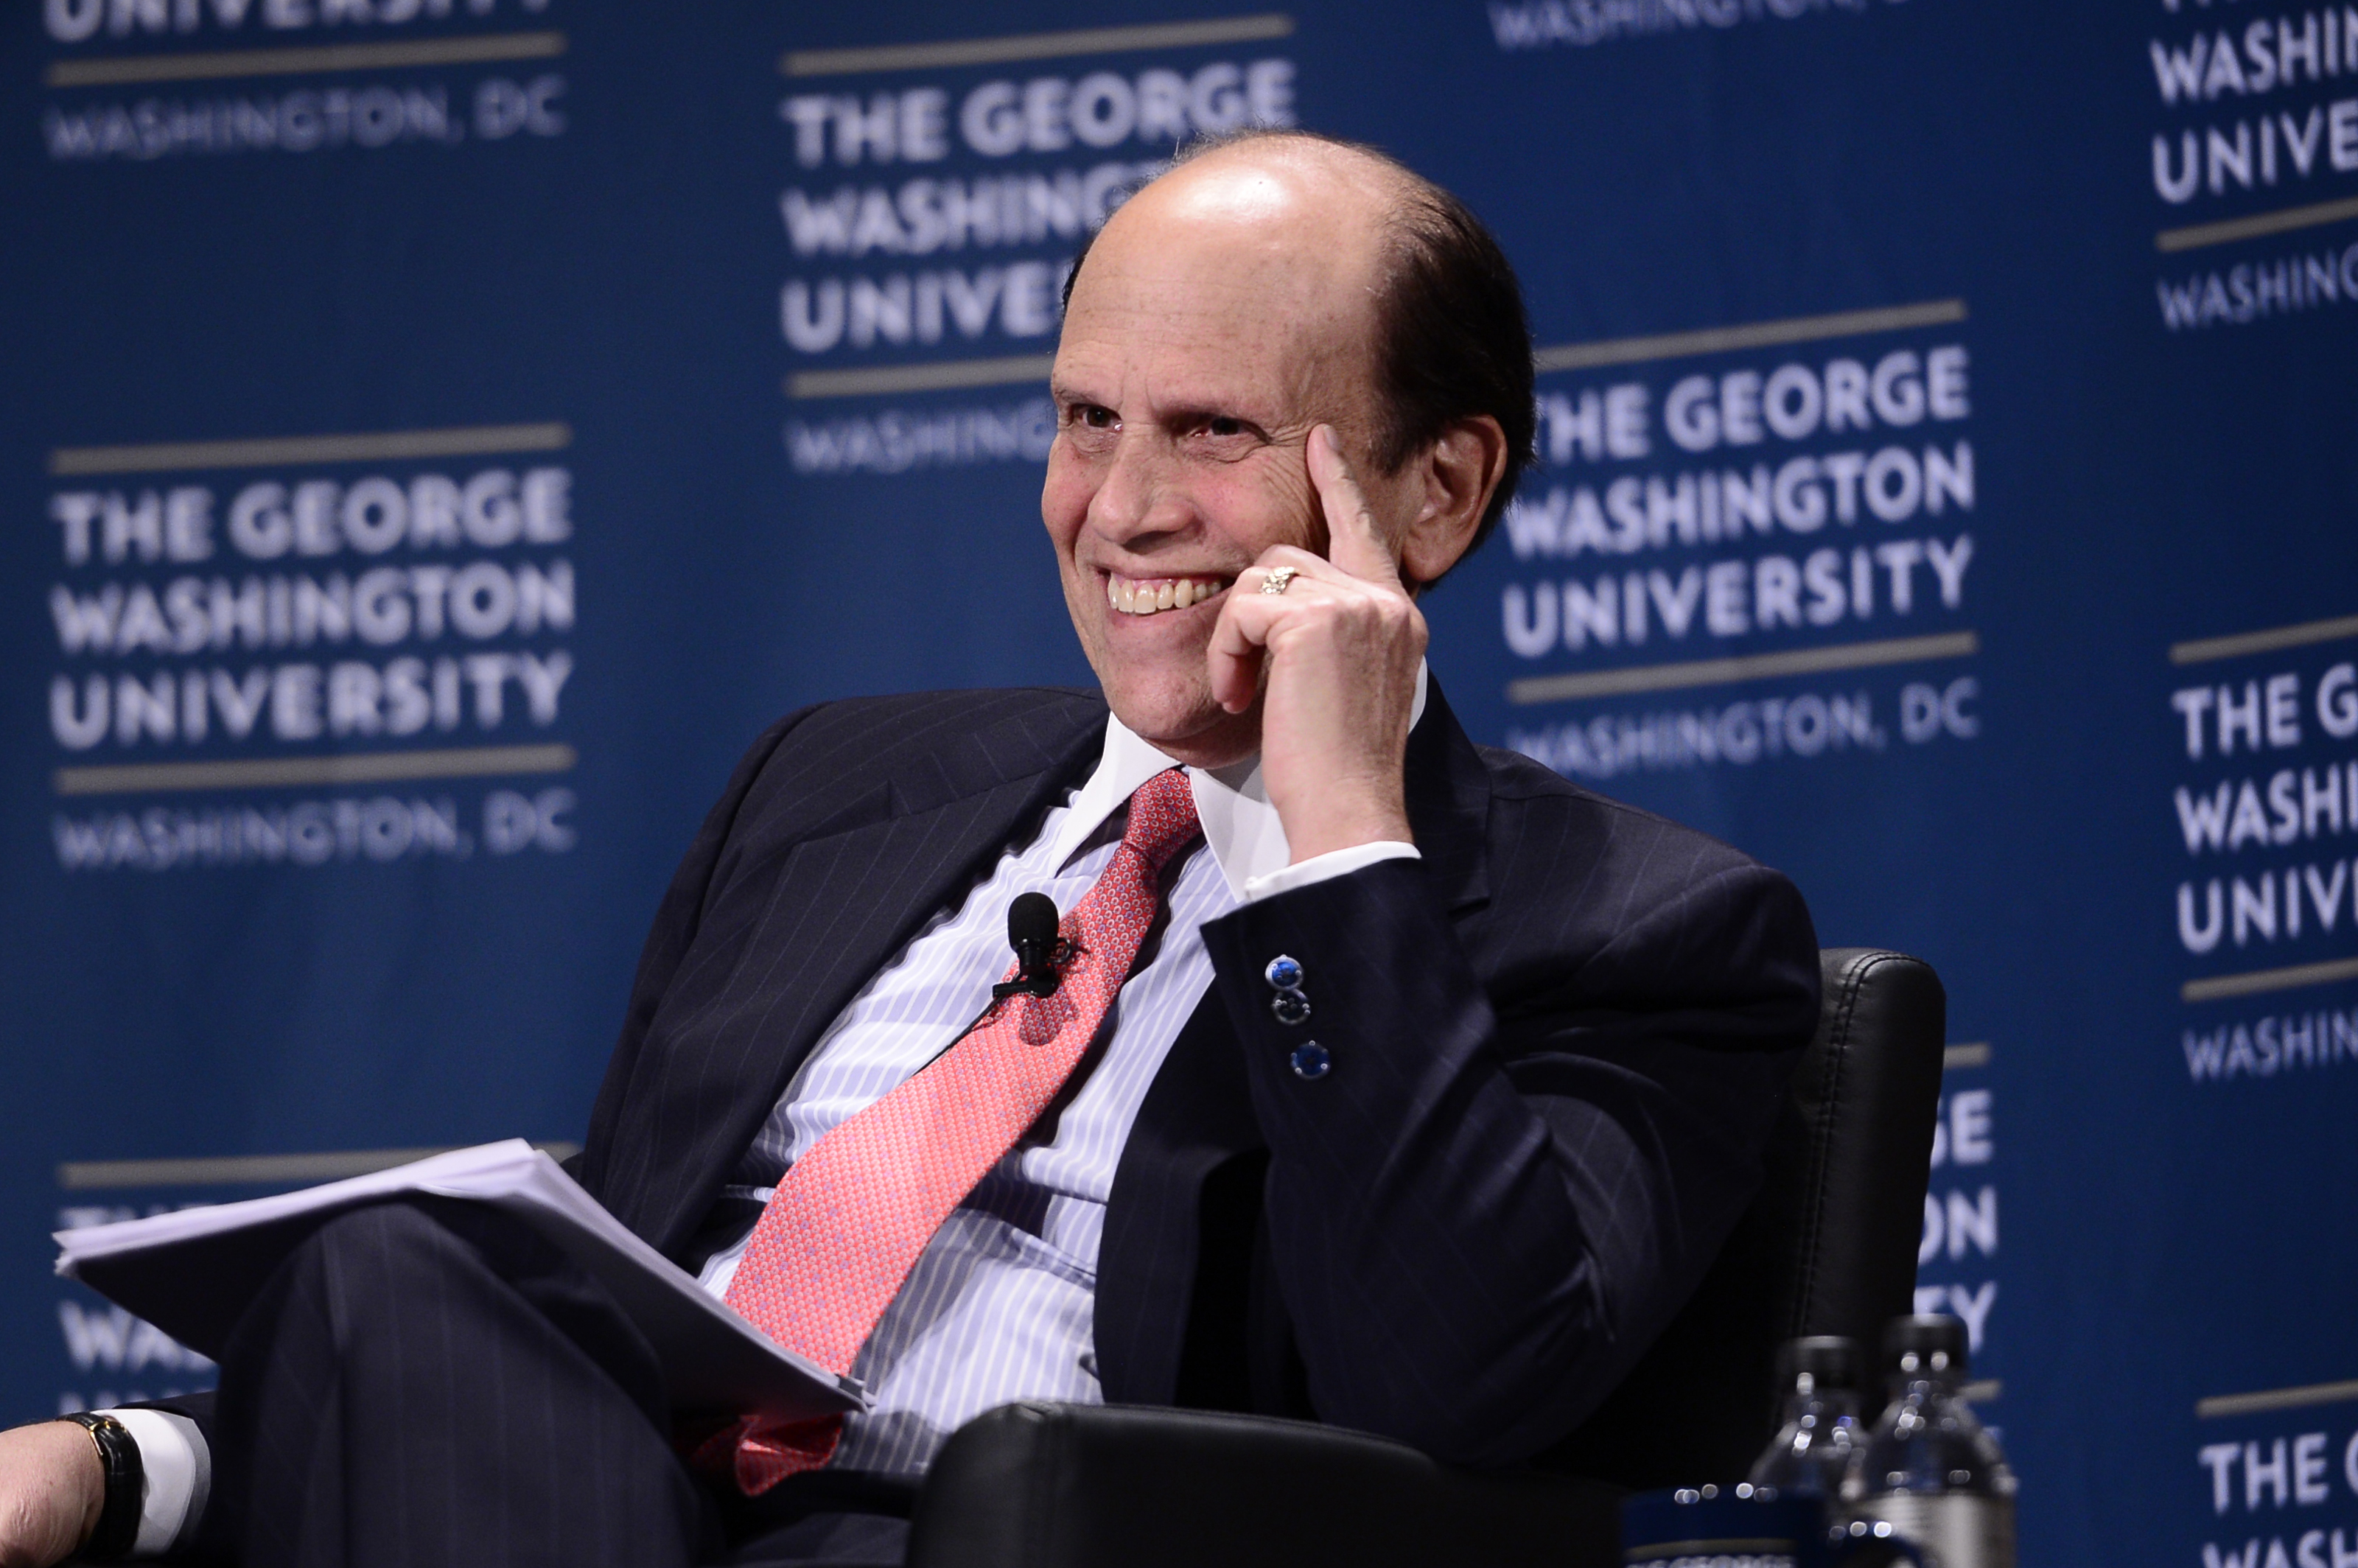 Michael Milken, a top GW benefactor, onstage at a university event in New York City.